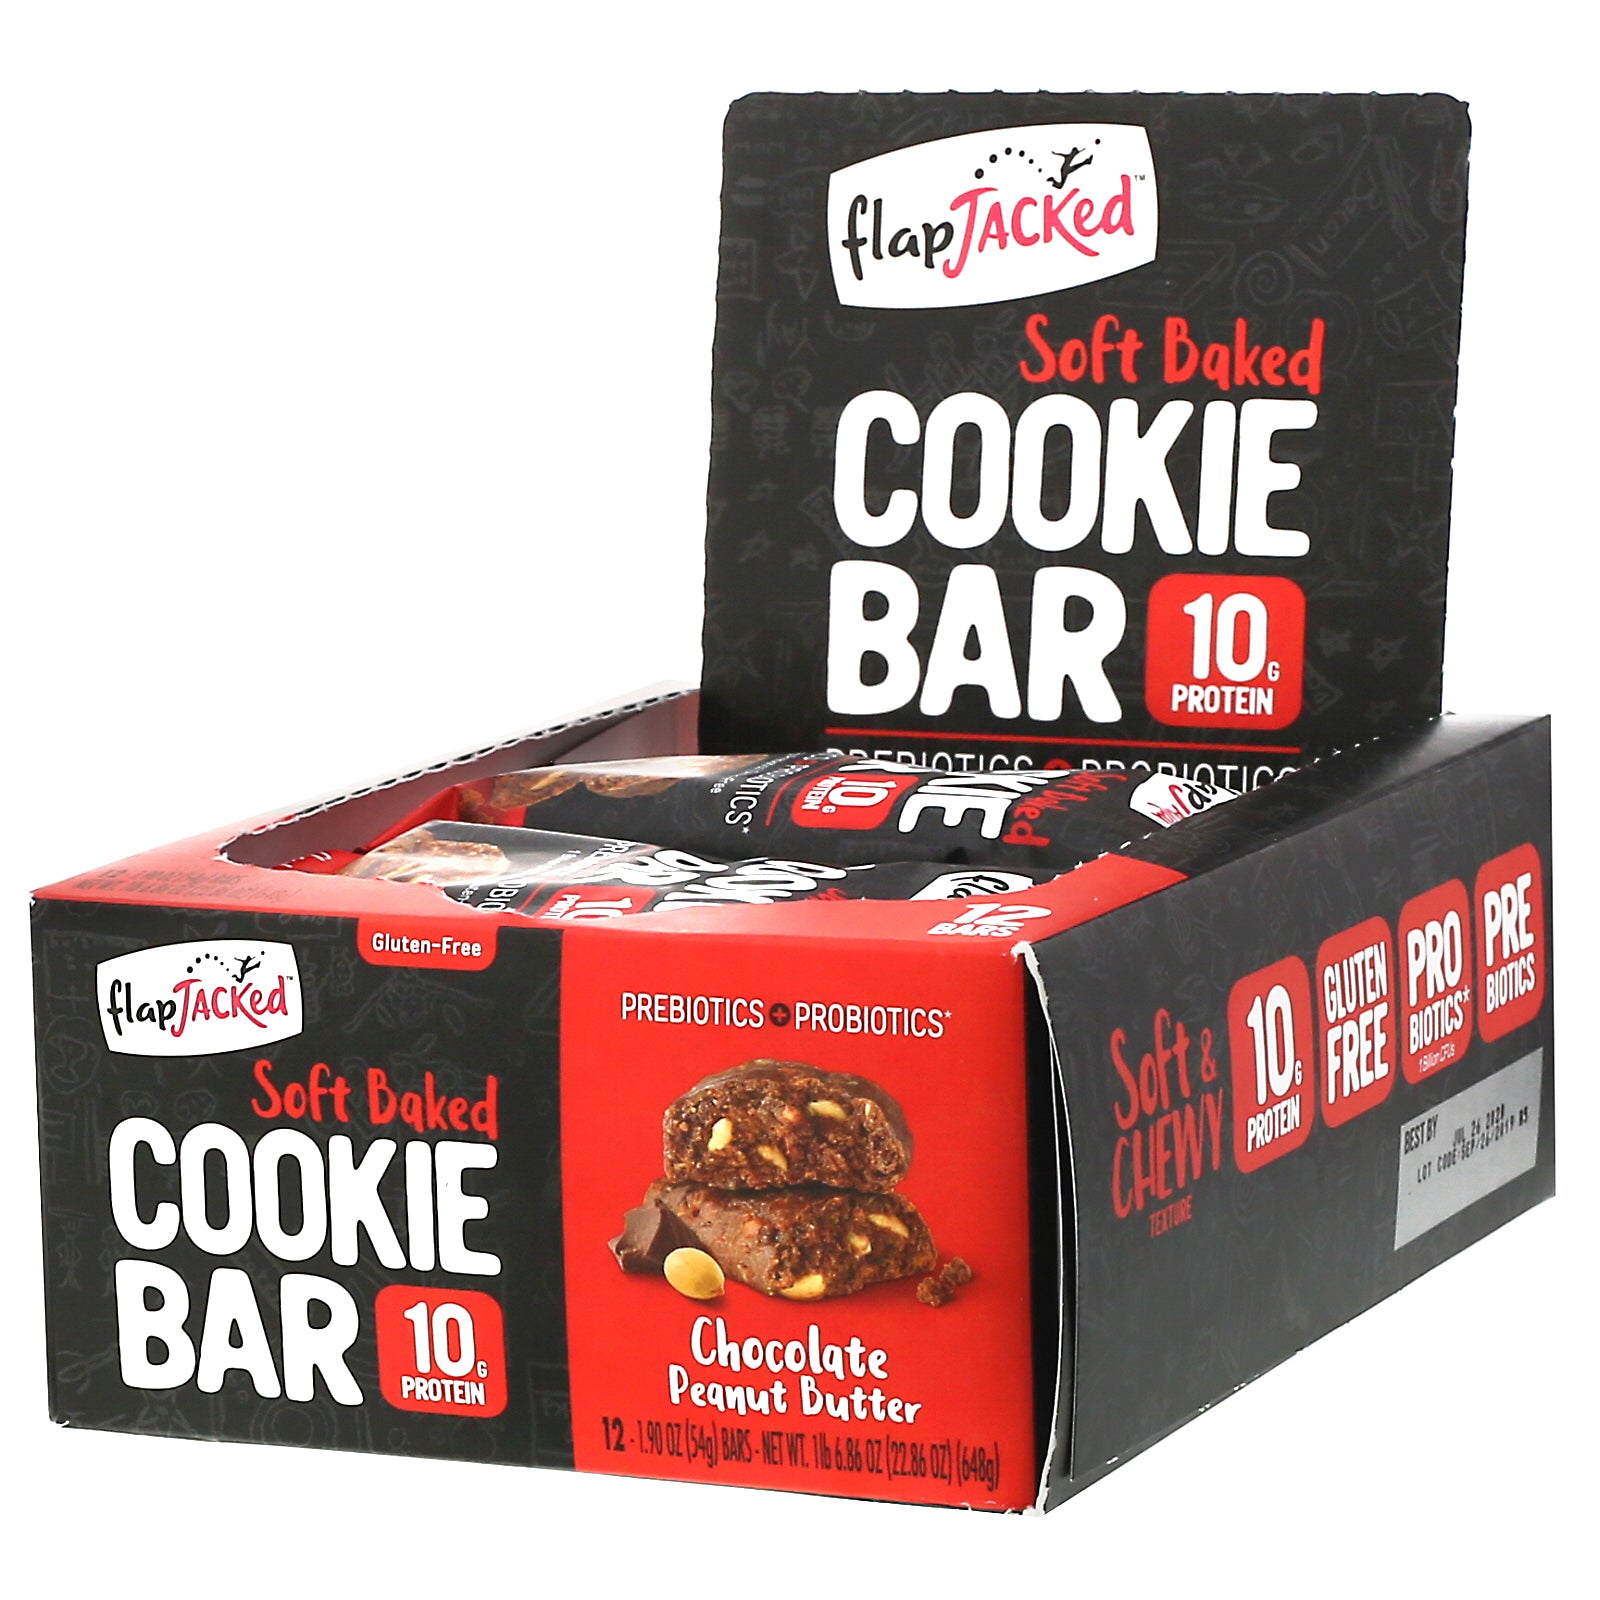 FlapJacked, Soft Baked Cookie Bar, Chocolate Peanut Butter, 12 Bars, 1.90 oz (54 g) Each